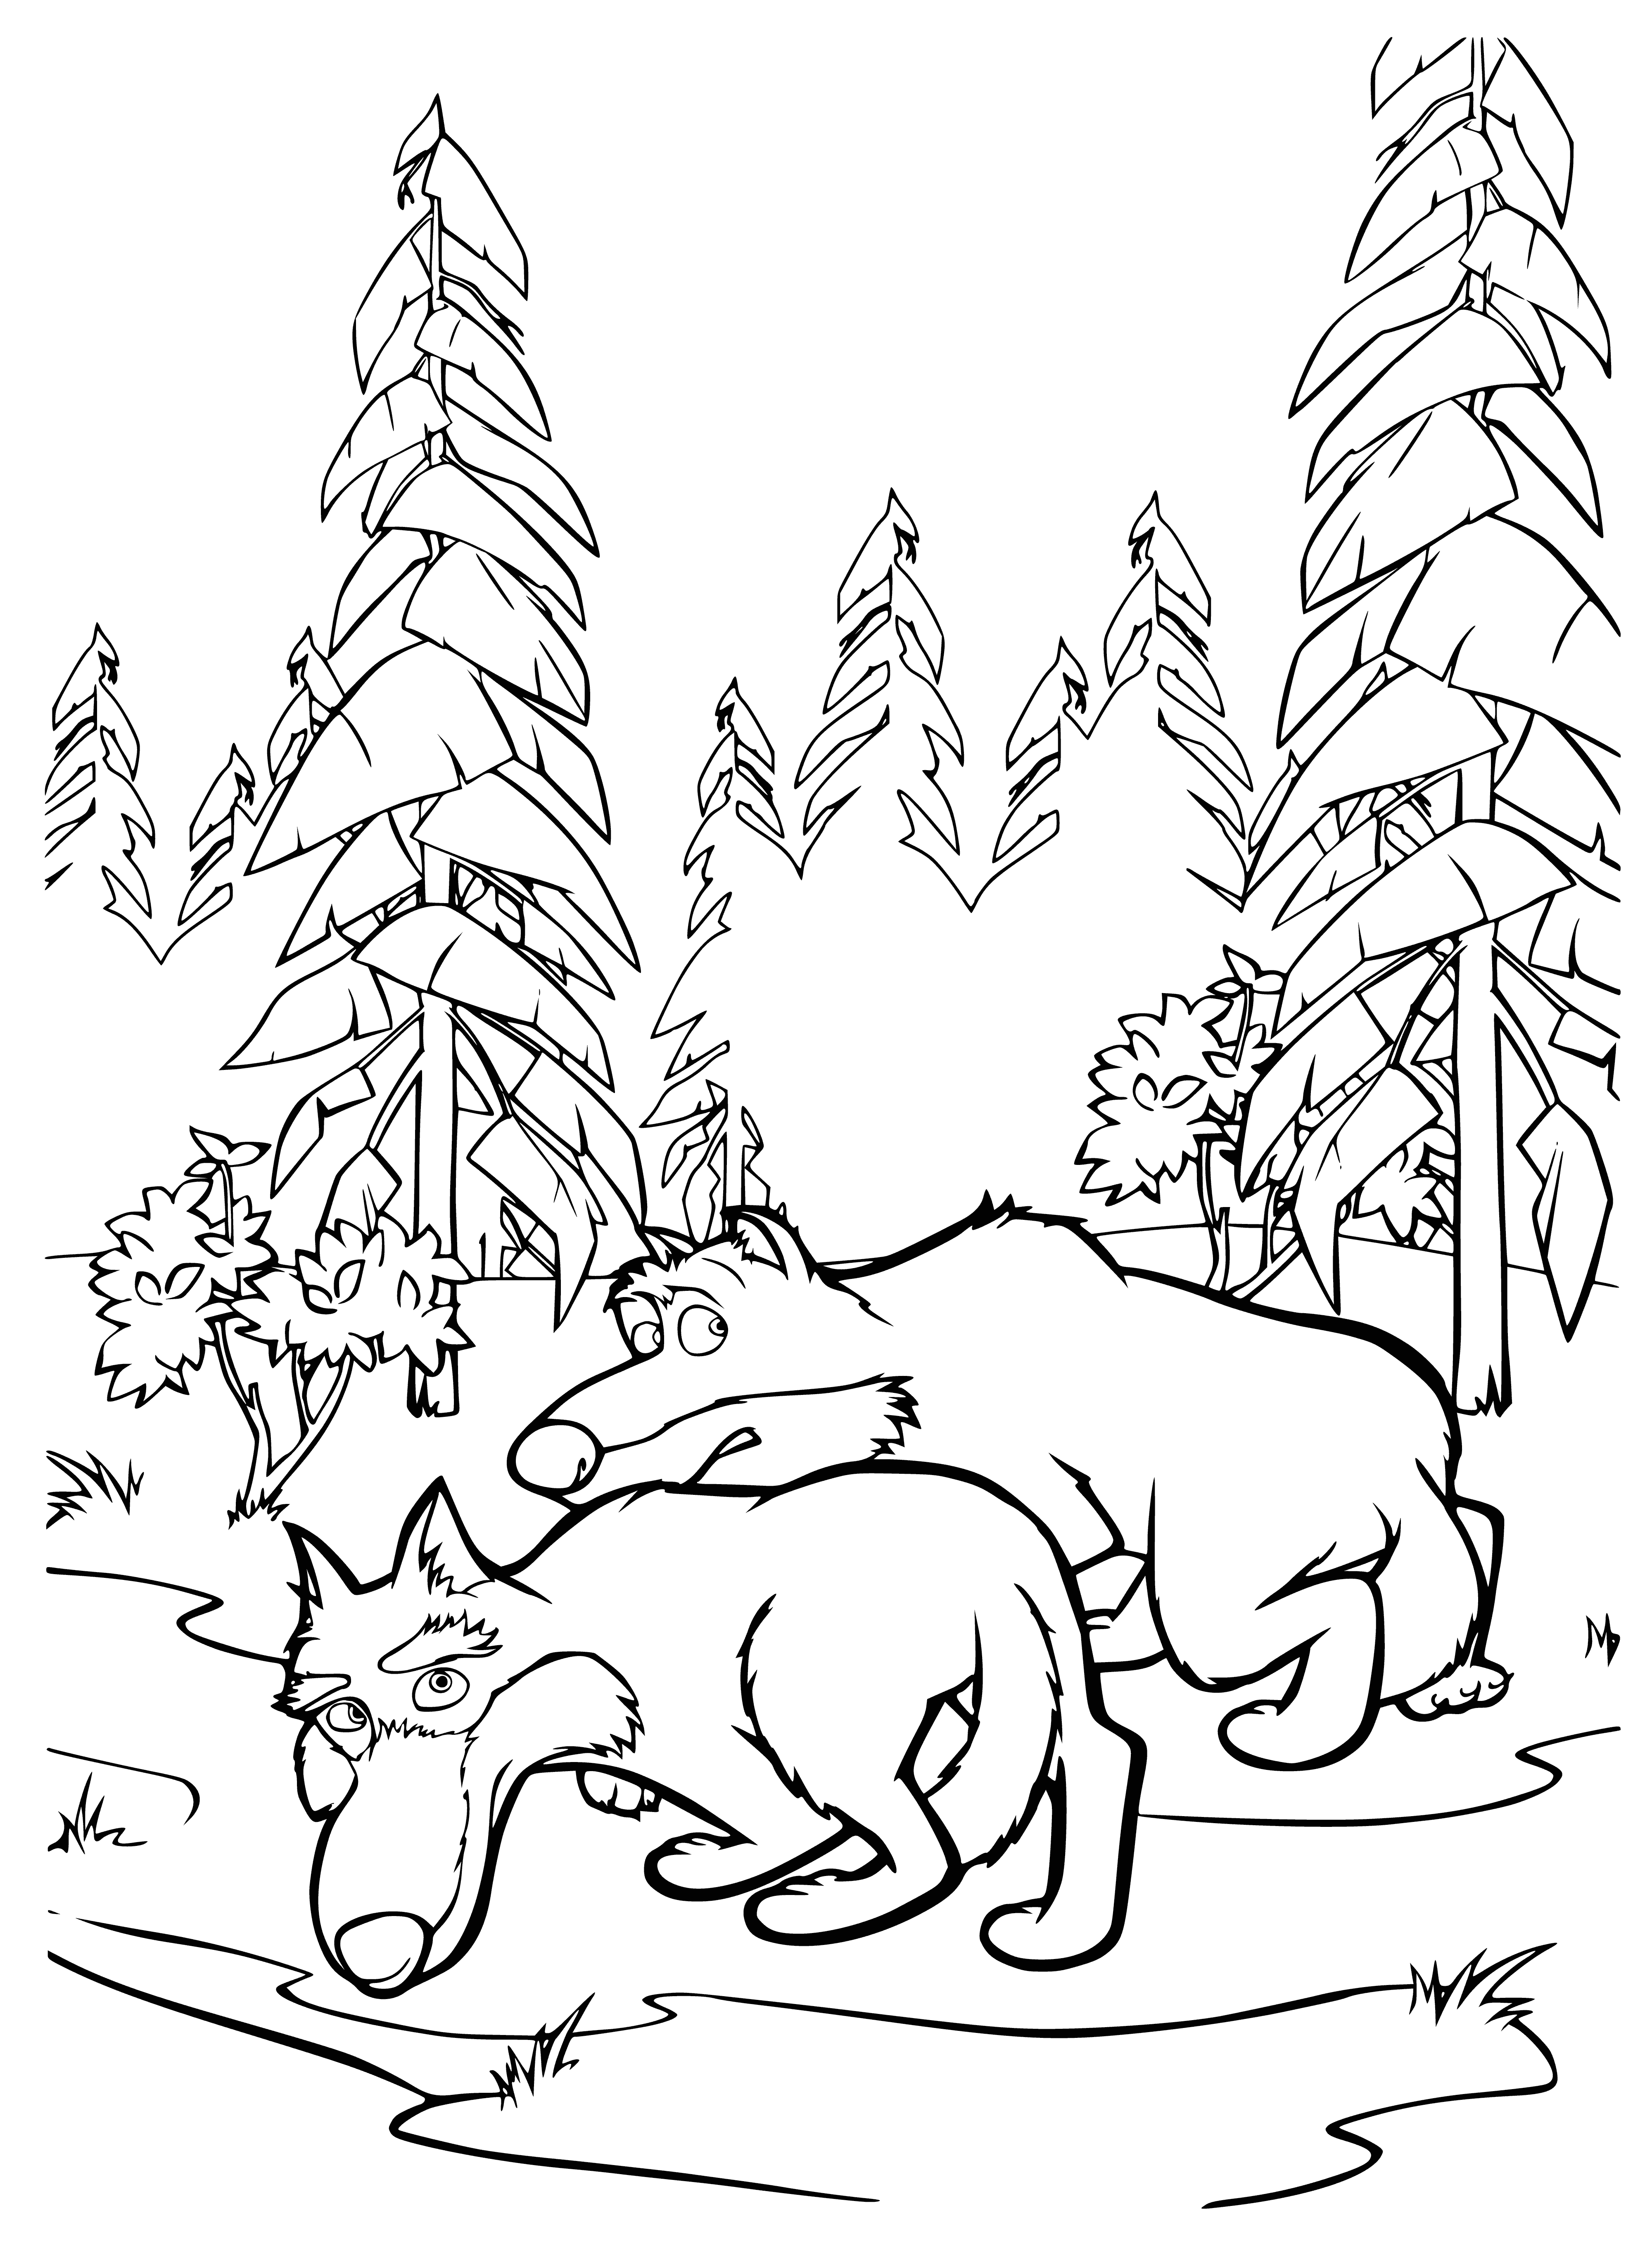 coloring page: Wolves flee Masha and Bear; Masha stands in the path, Bear behind her.